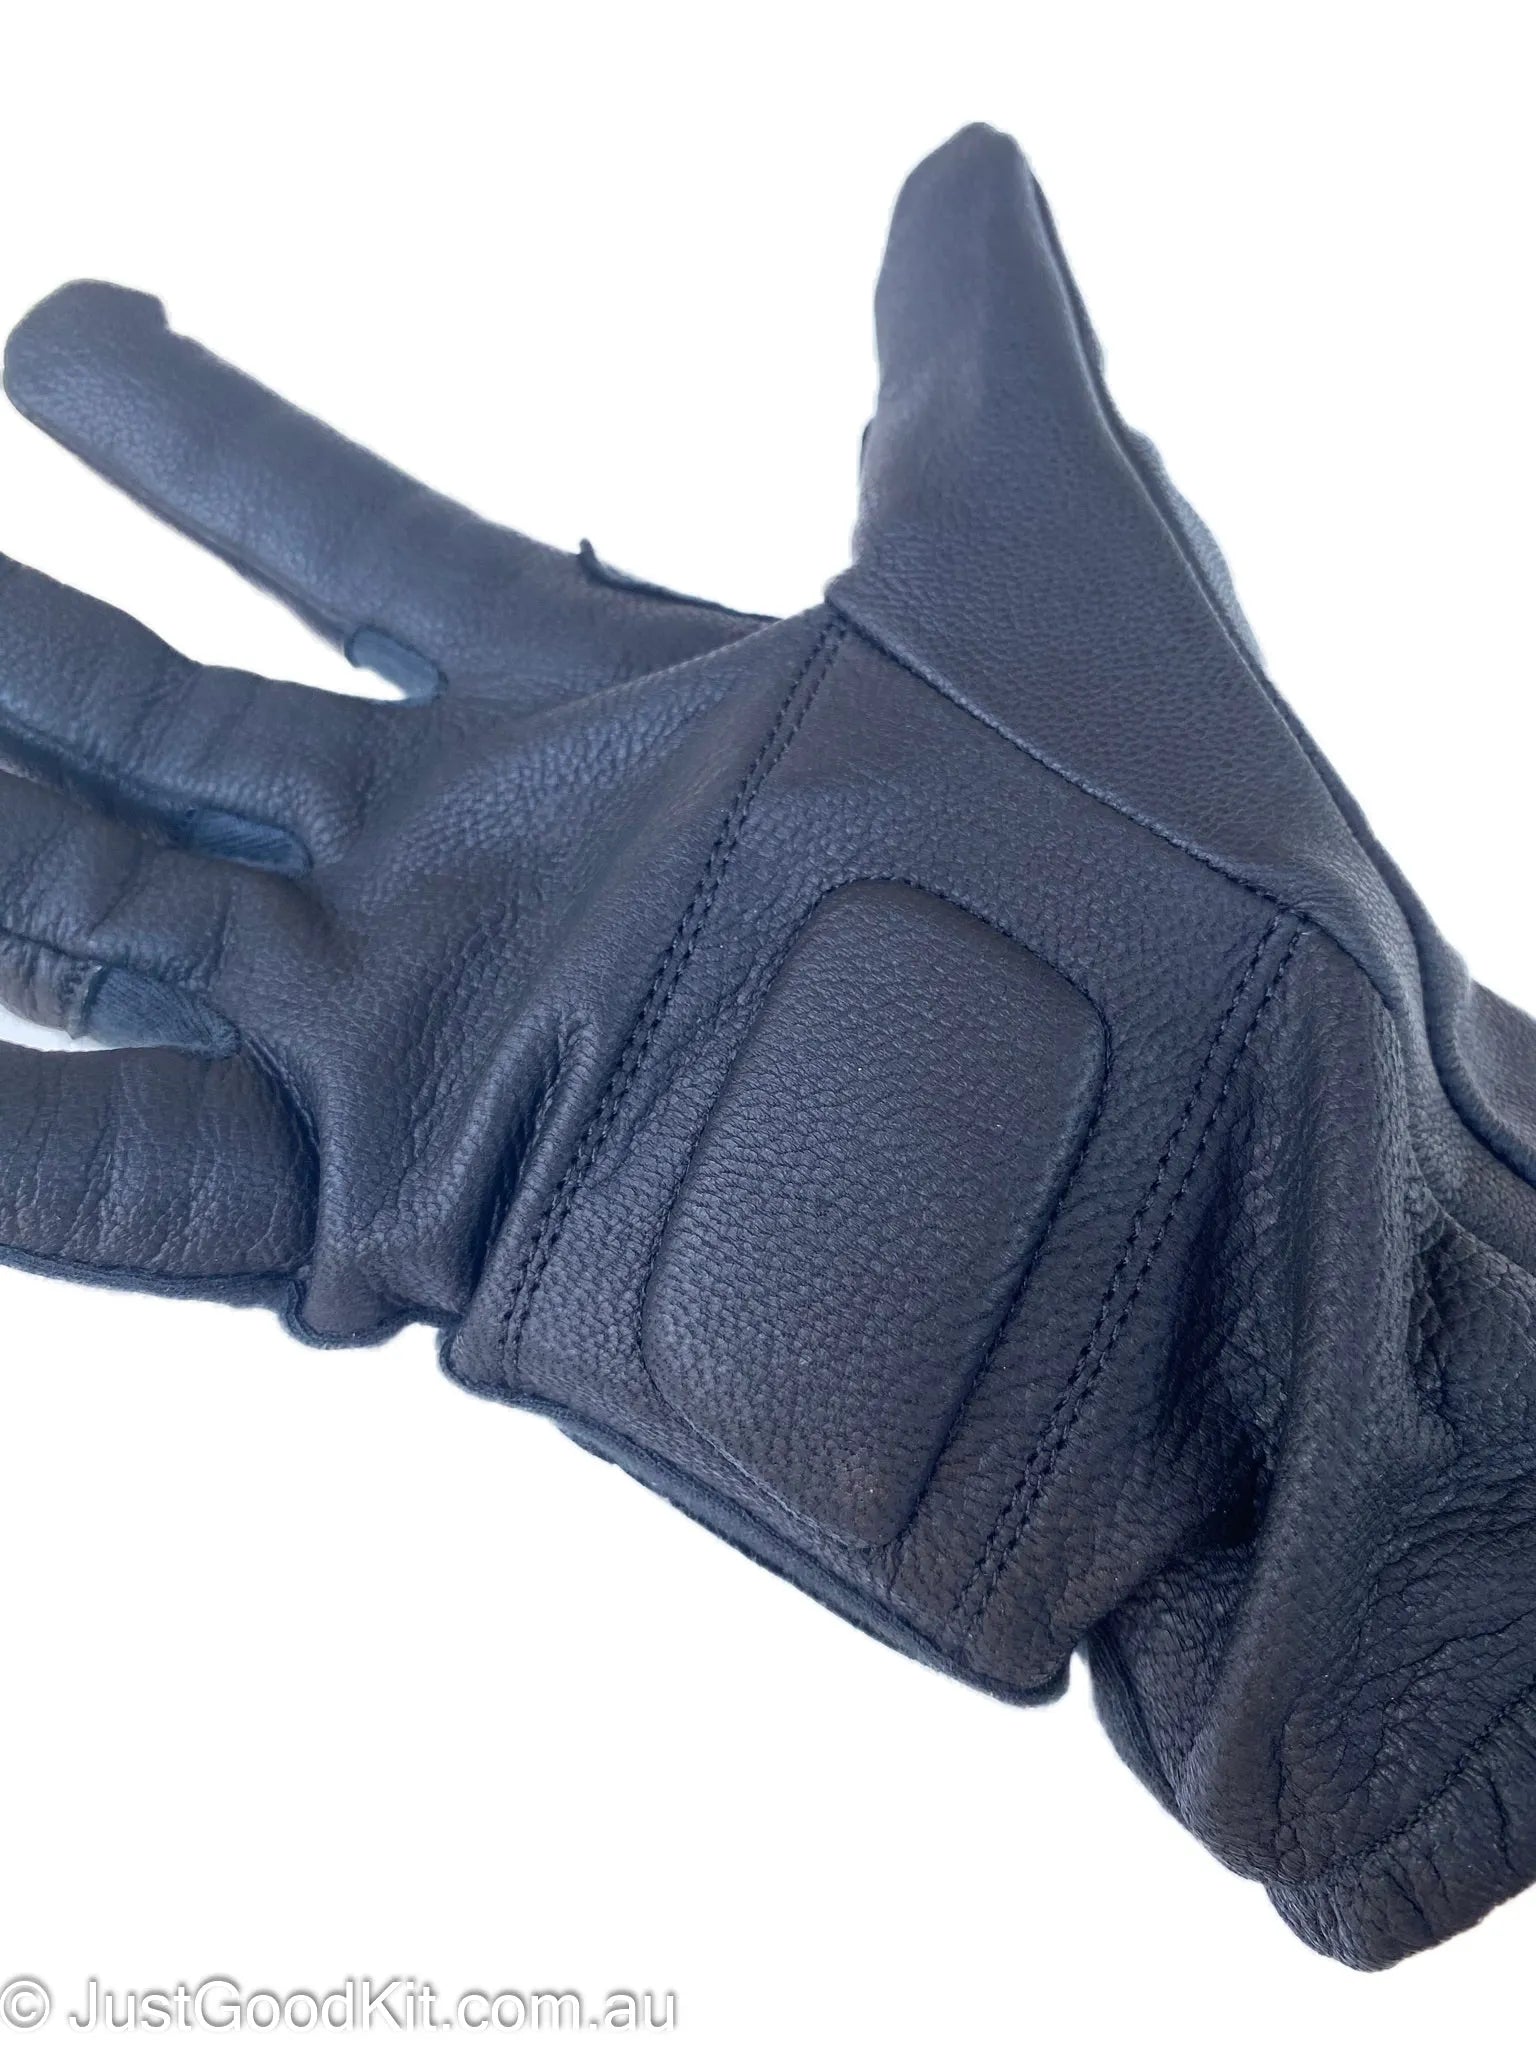 Tactical Gloves for Military and First Responders JustGoodKit Tactical Gloves for Military and First Responders Gloves